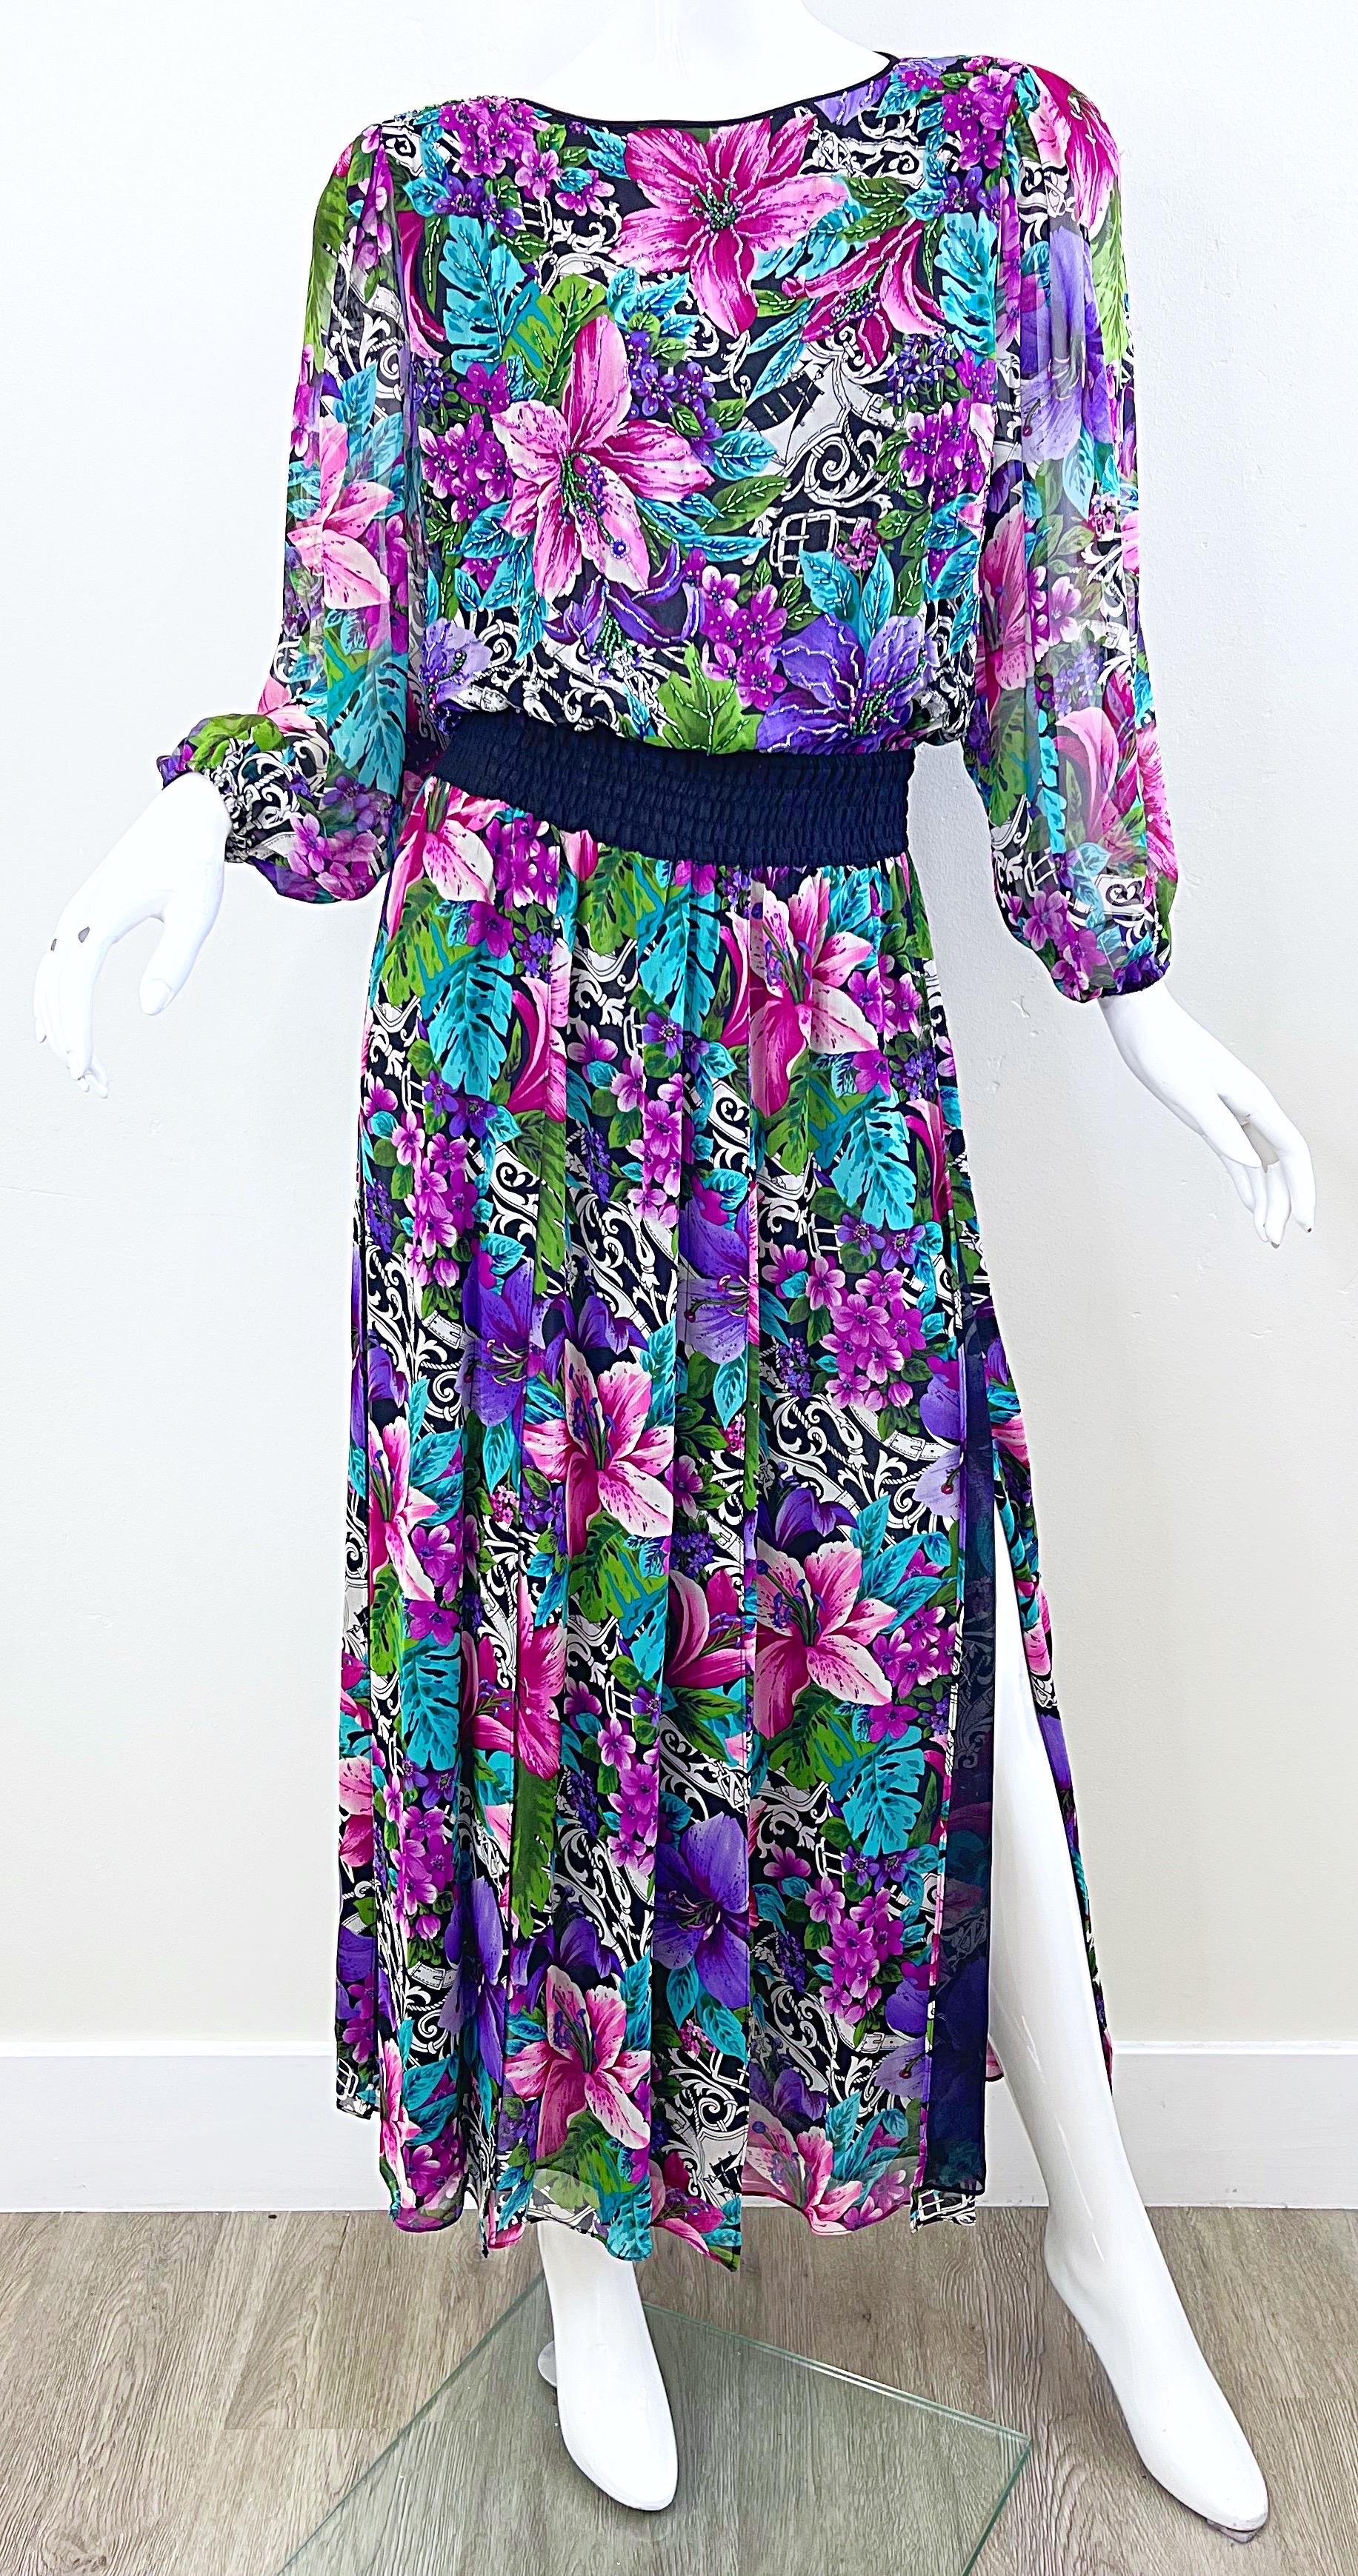 Diane Freis 1980s Silk Chiffon Beaded Tropical Print Vintage 80s Maxi Dress In Excellent Condition For Sale In San Diego, CA